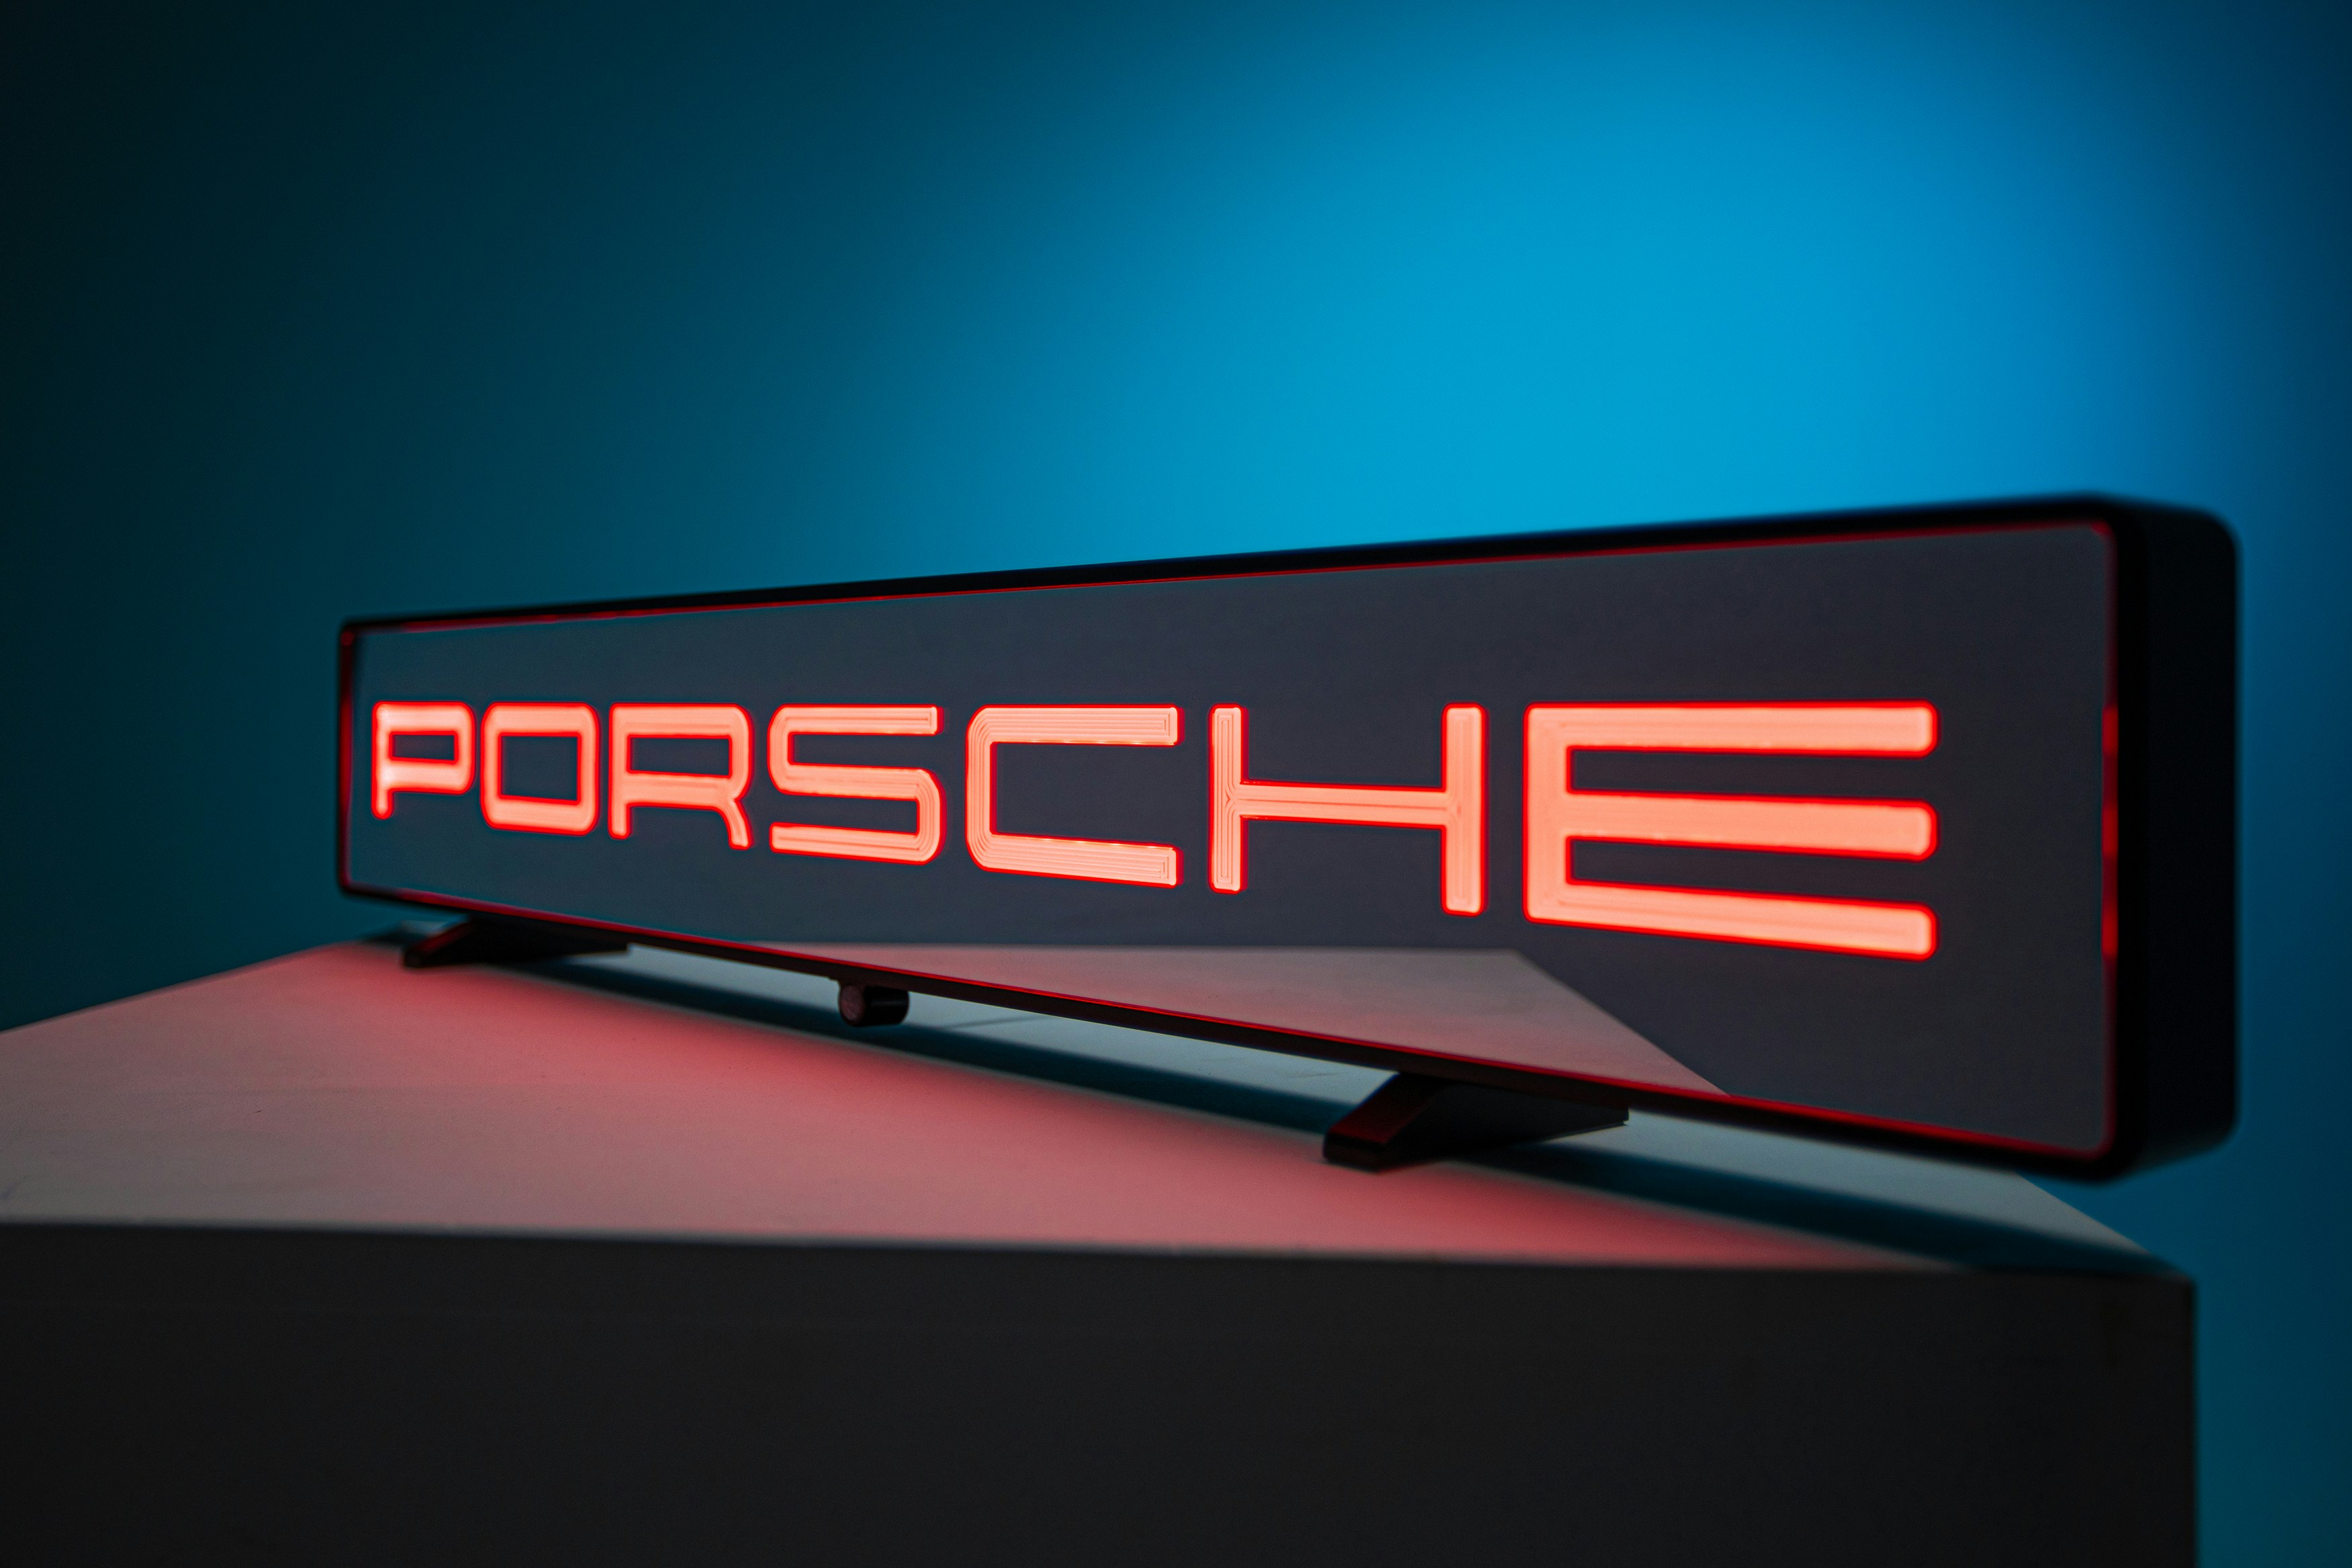 PORSCHE ILLUMINATED SIGN for sale by auction in St Albans, Hertfordshire,  United Kingdom